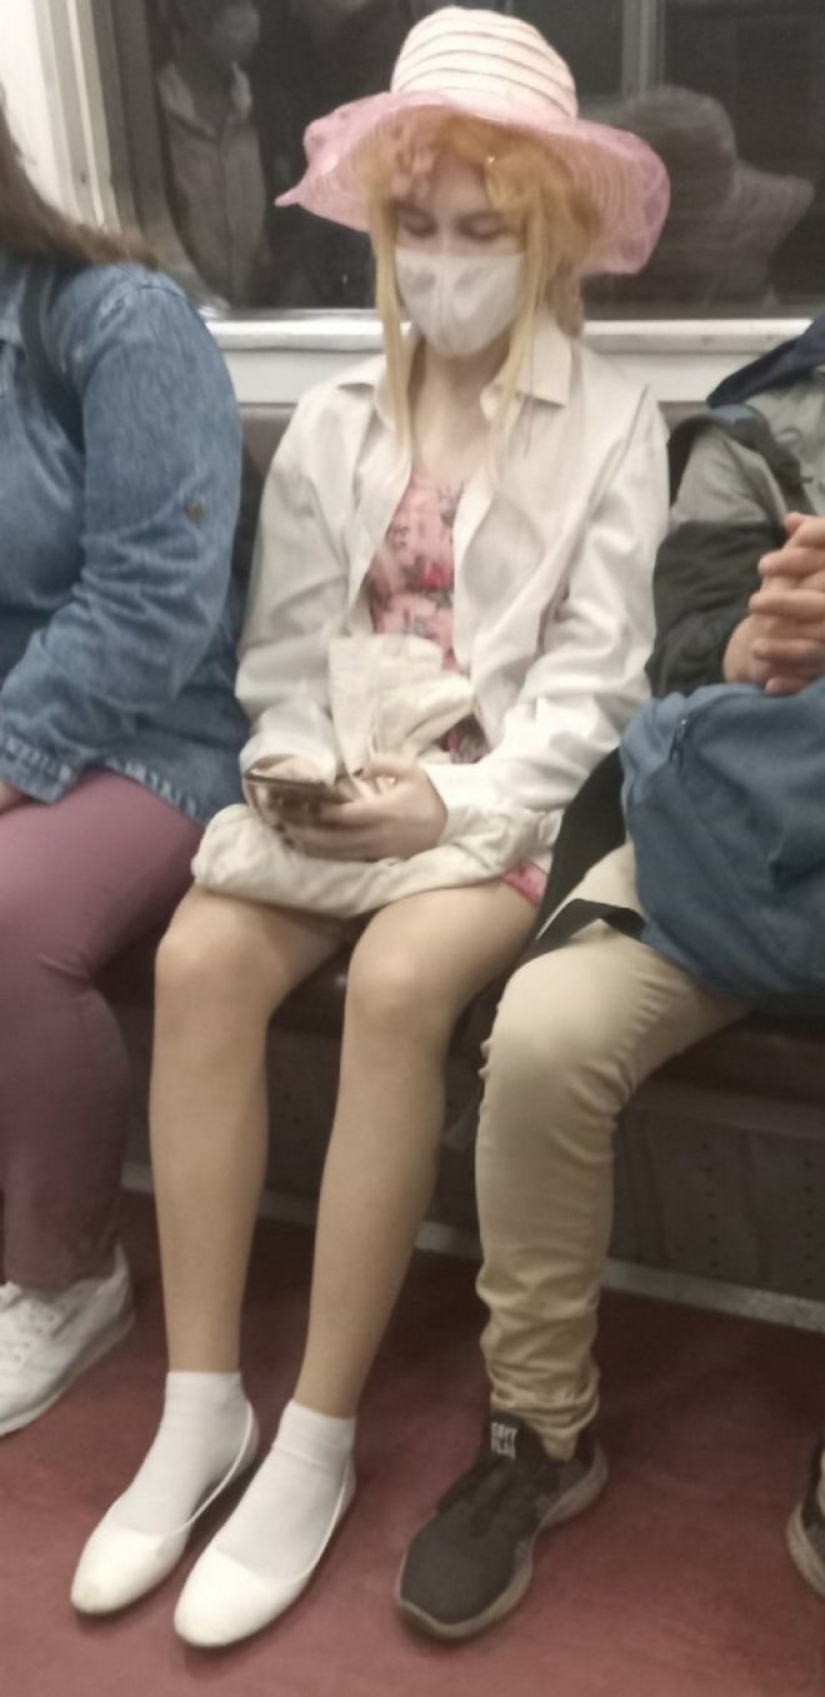 22 subway fashionistas who don't care what anyone thinks of them